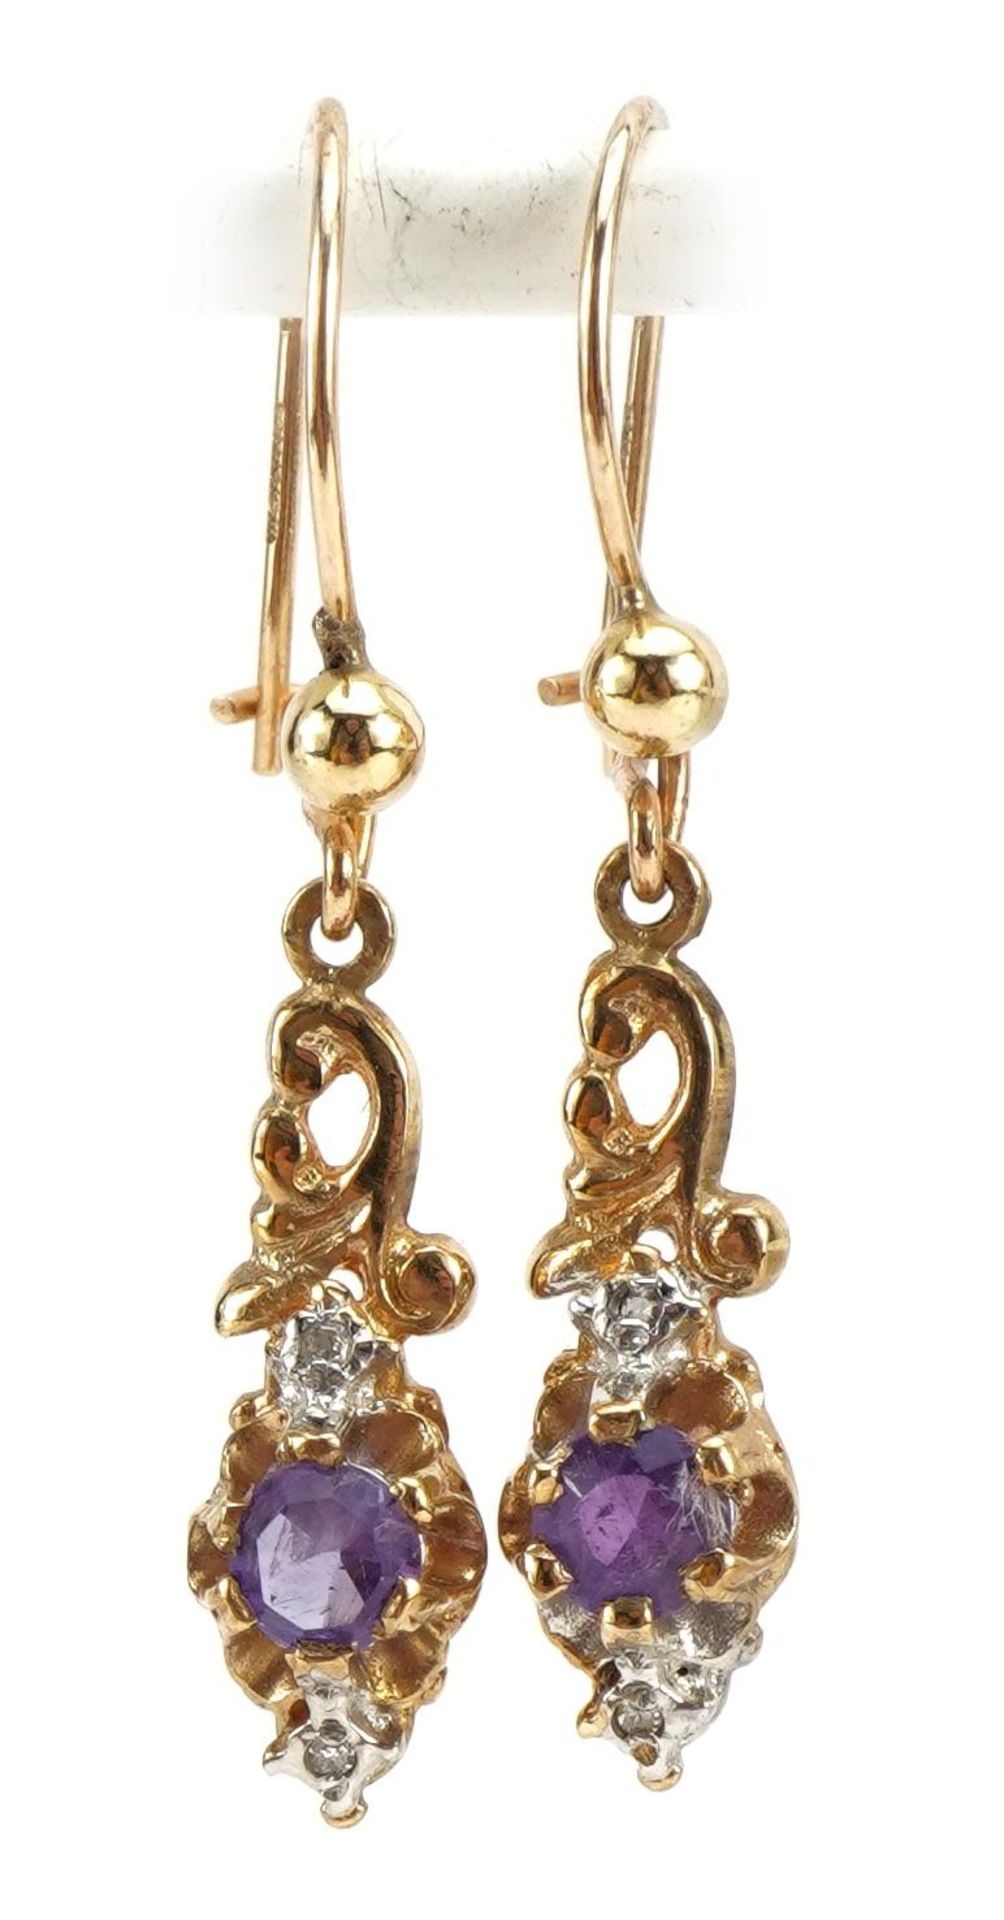 Pair of 9ct gold amethyst and diamond drop earrings, 2.1cm high, 1.9g